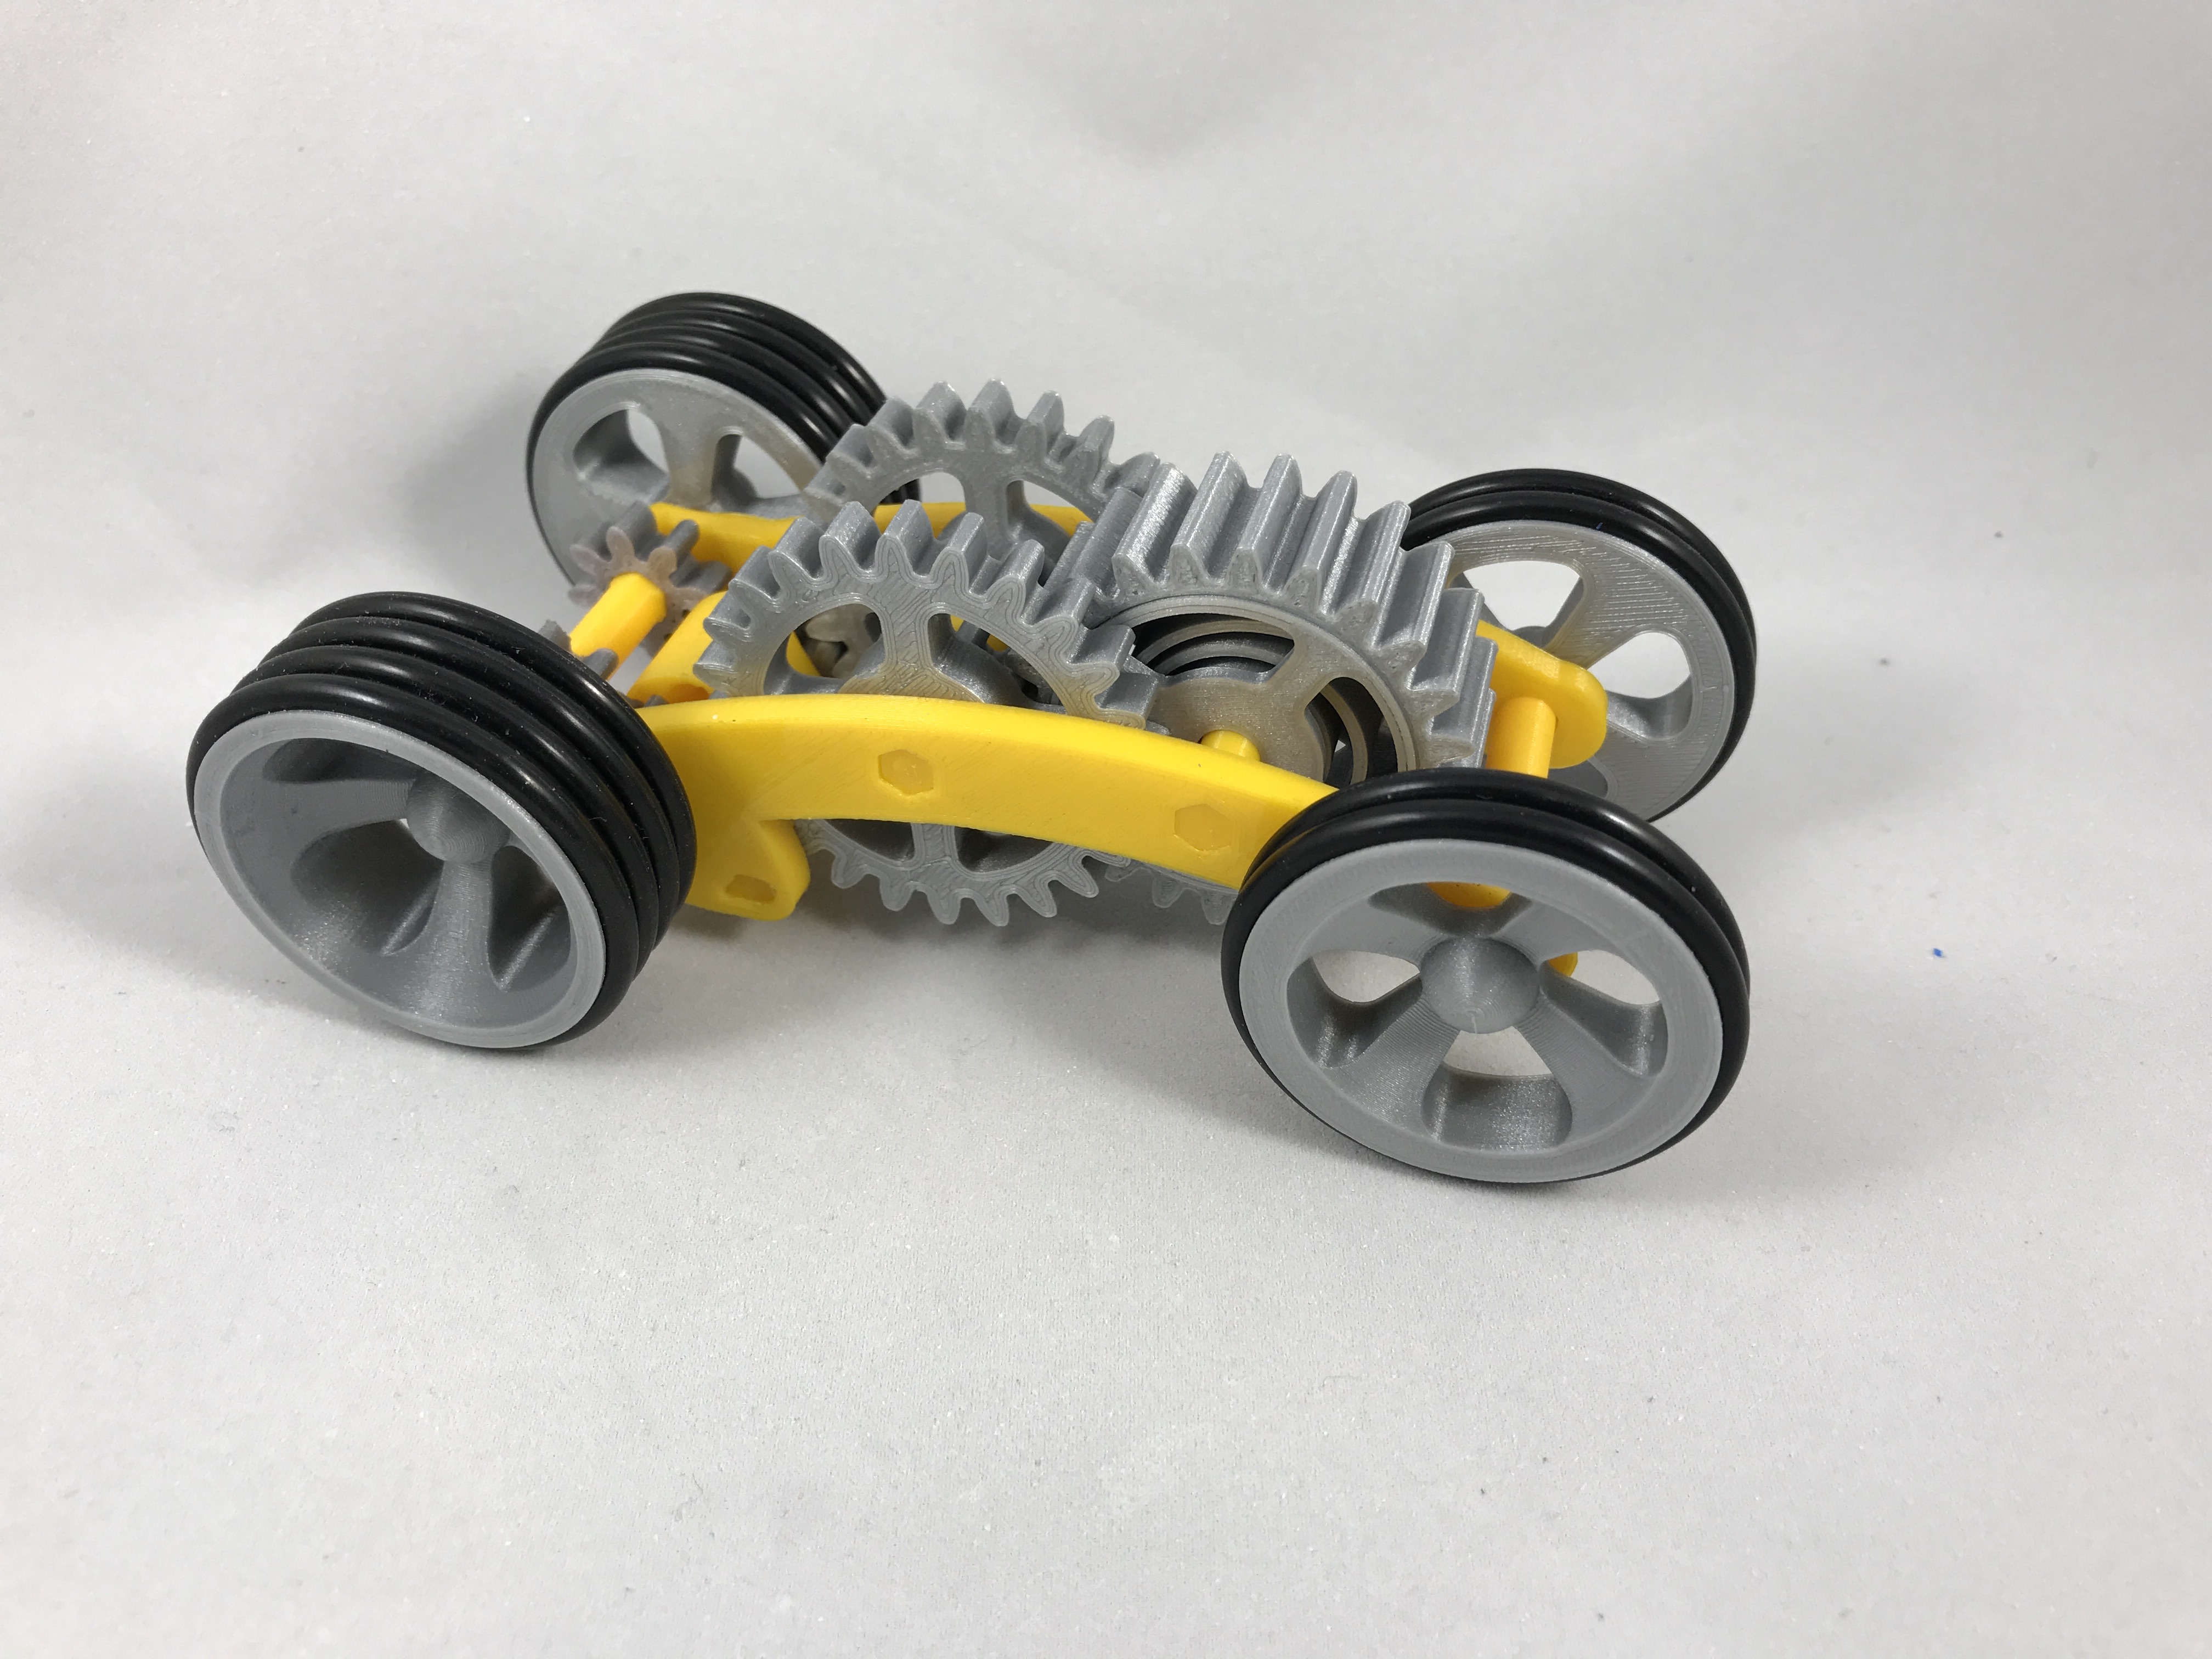 Tabletop Tri-Mode Spring Motor Rolling Chassis